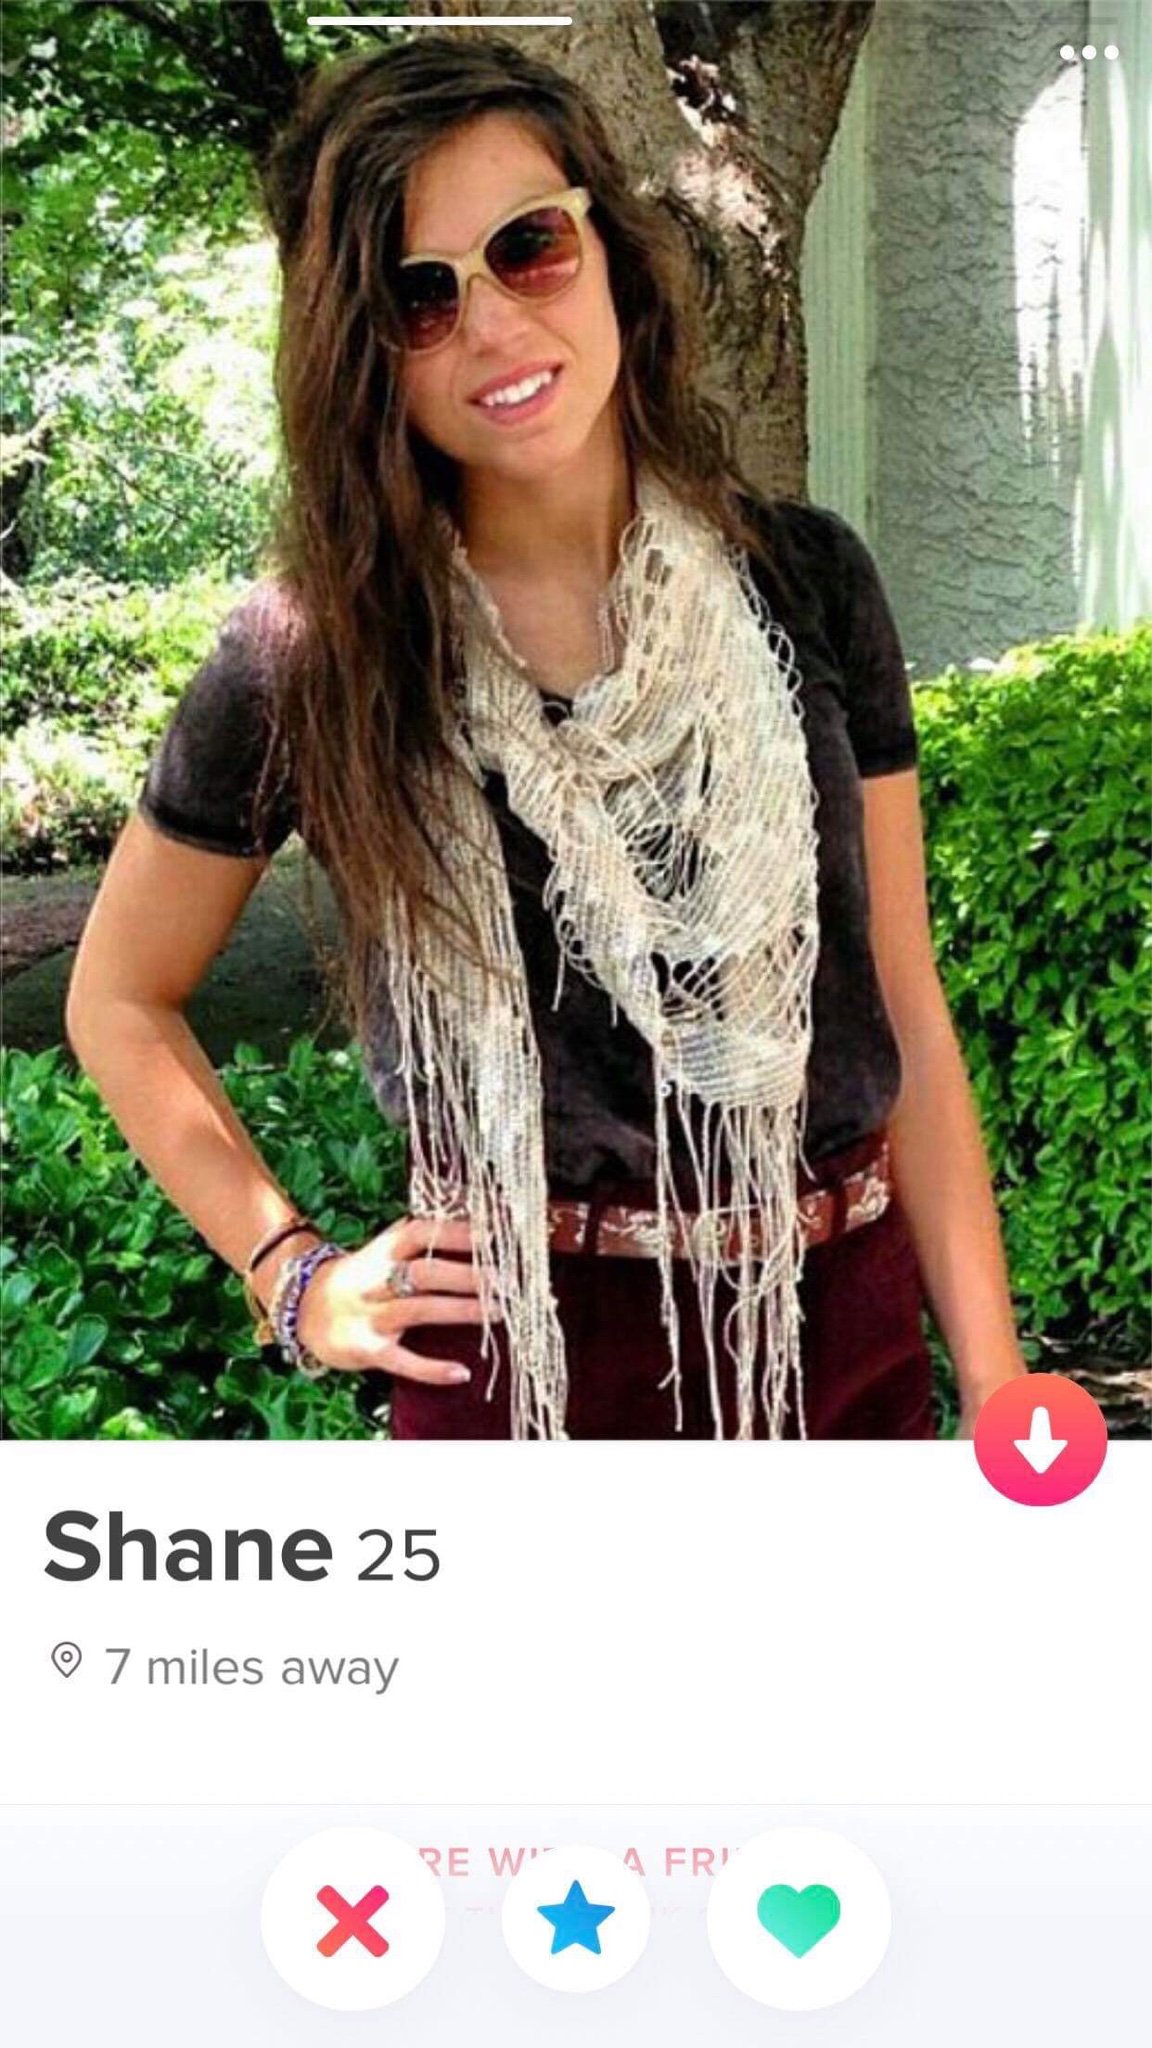 Someone stoled my pictures to make fake tinder account